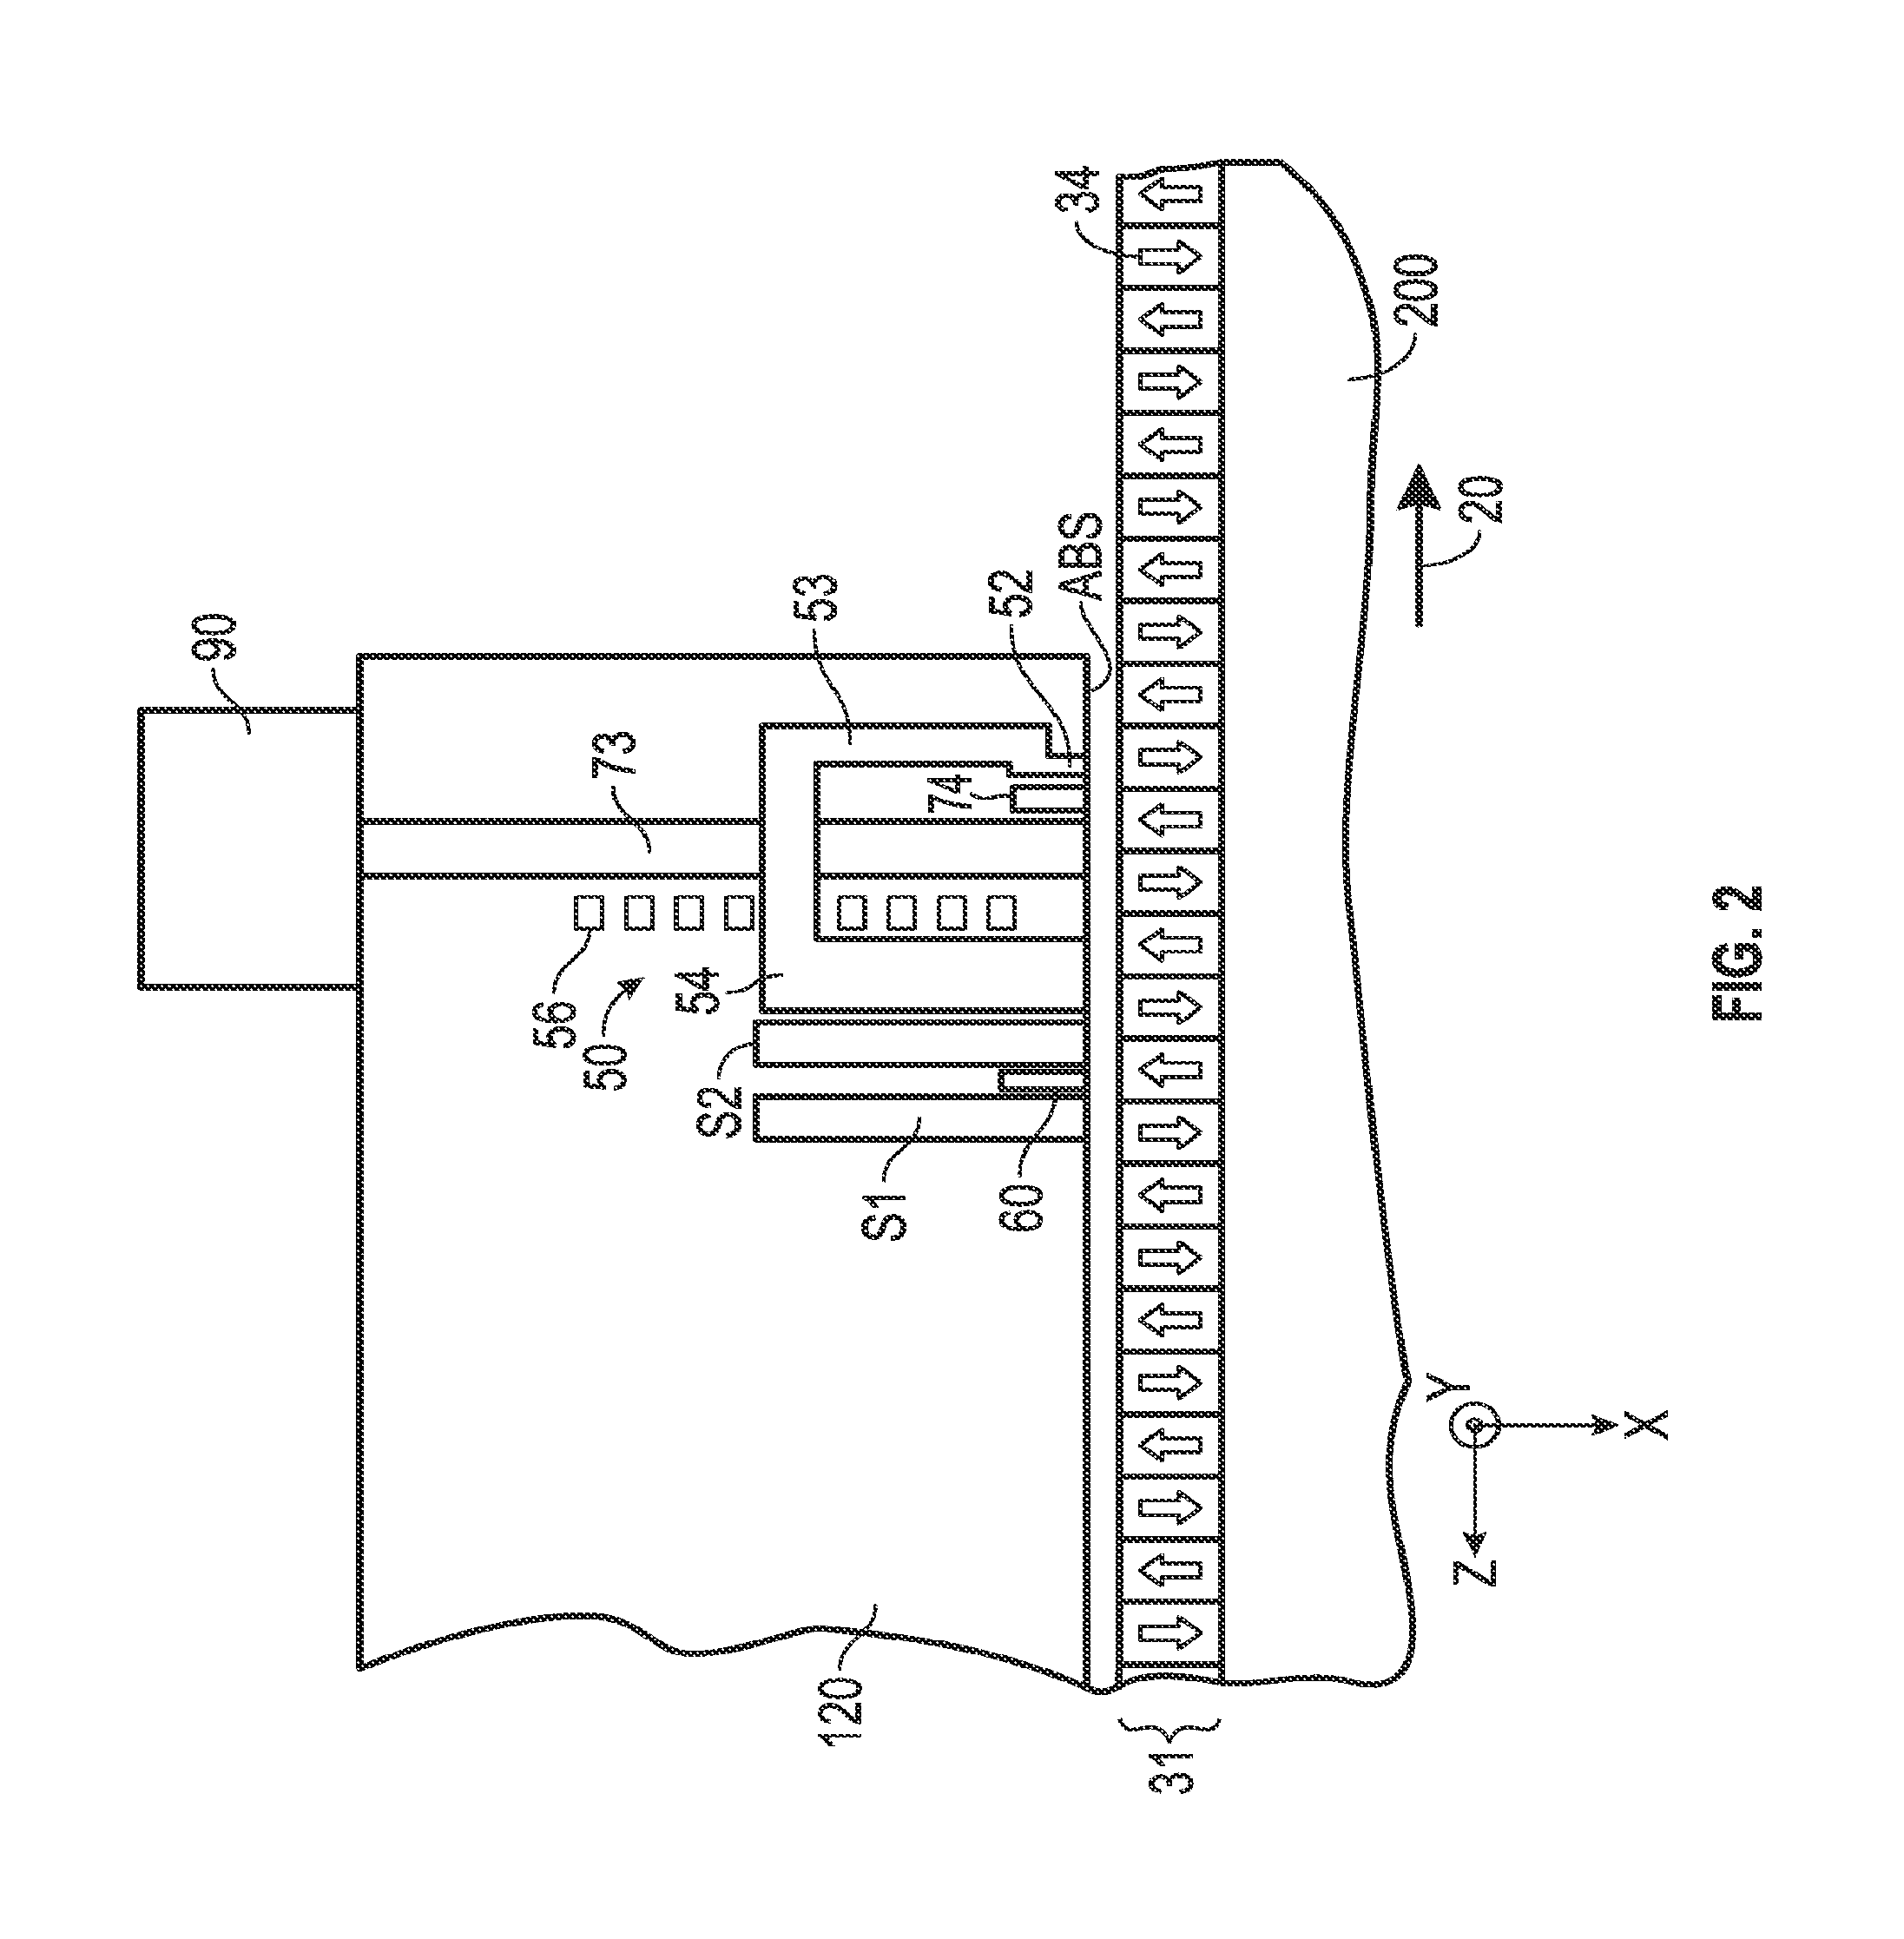 Thermally-assisted recording (TAR) head with waveguide having tapered region coupled to near-field transducer